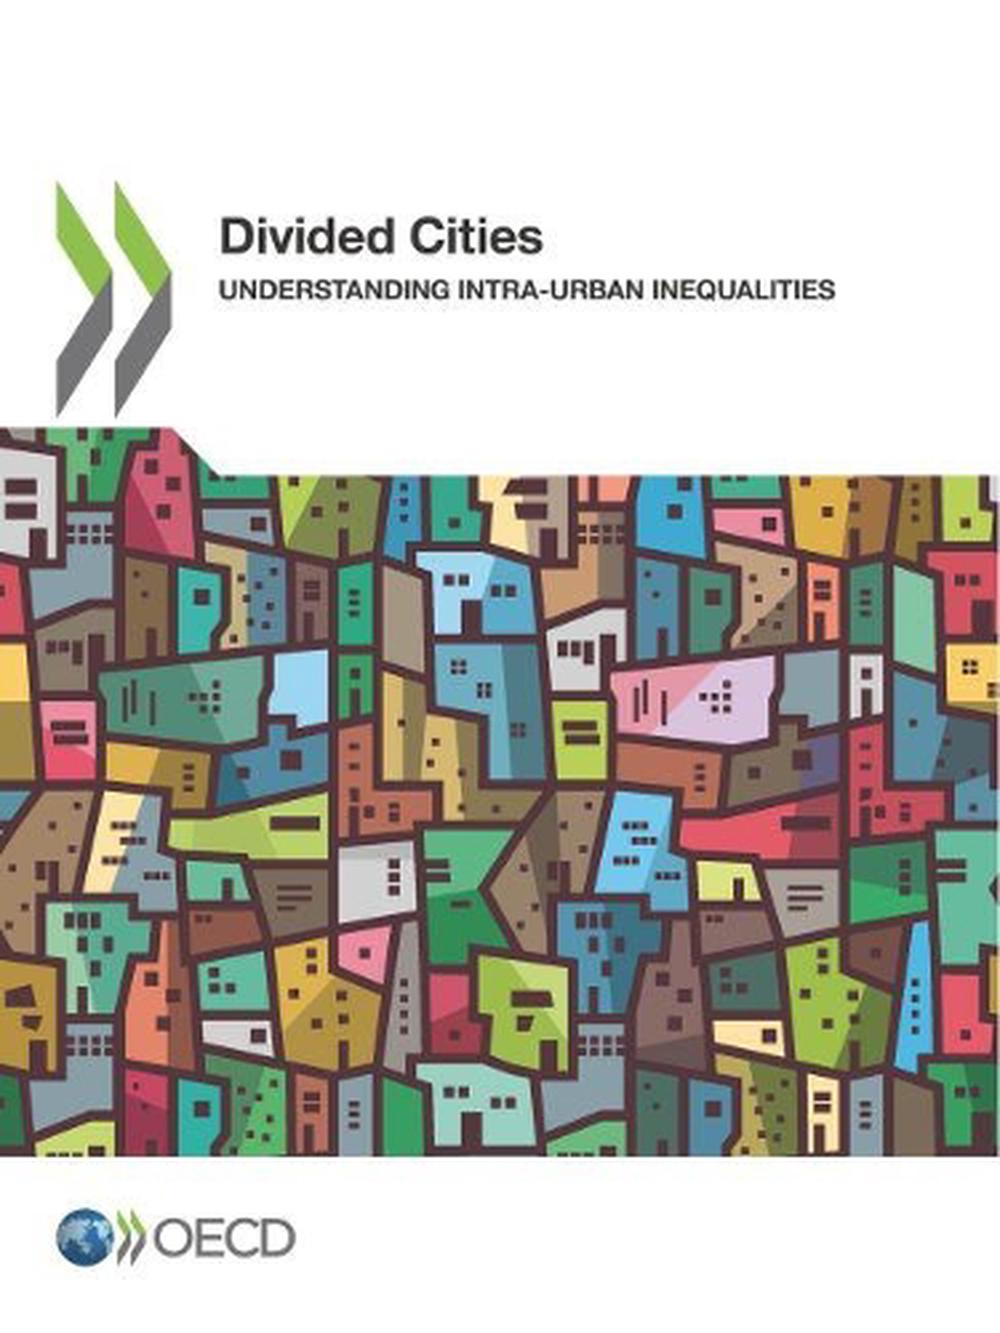 Divided city book report